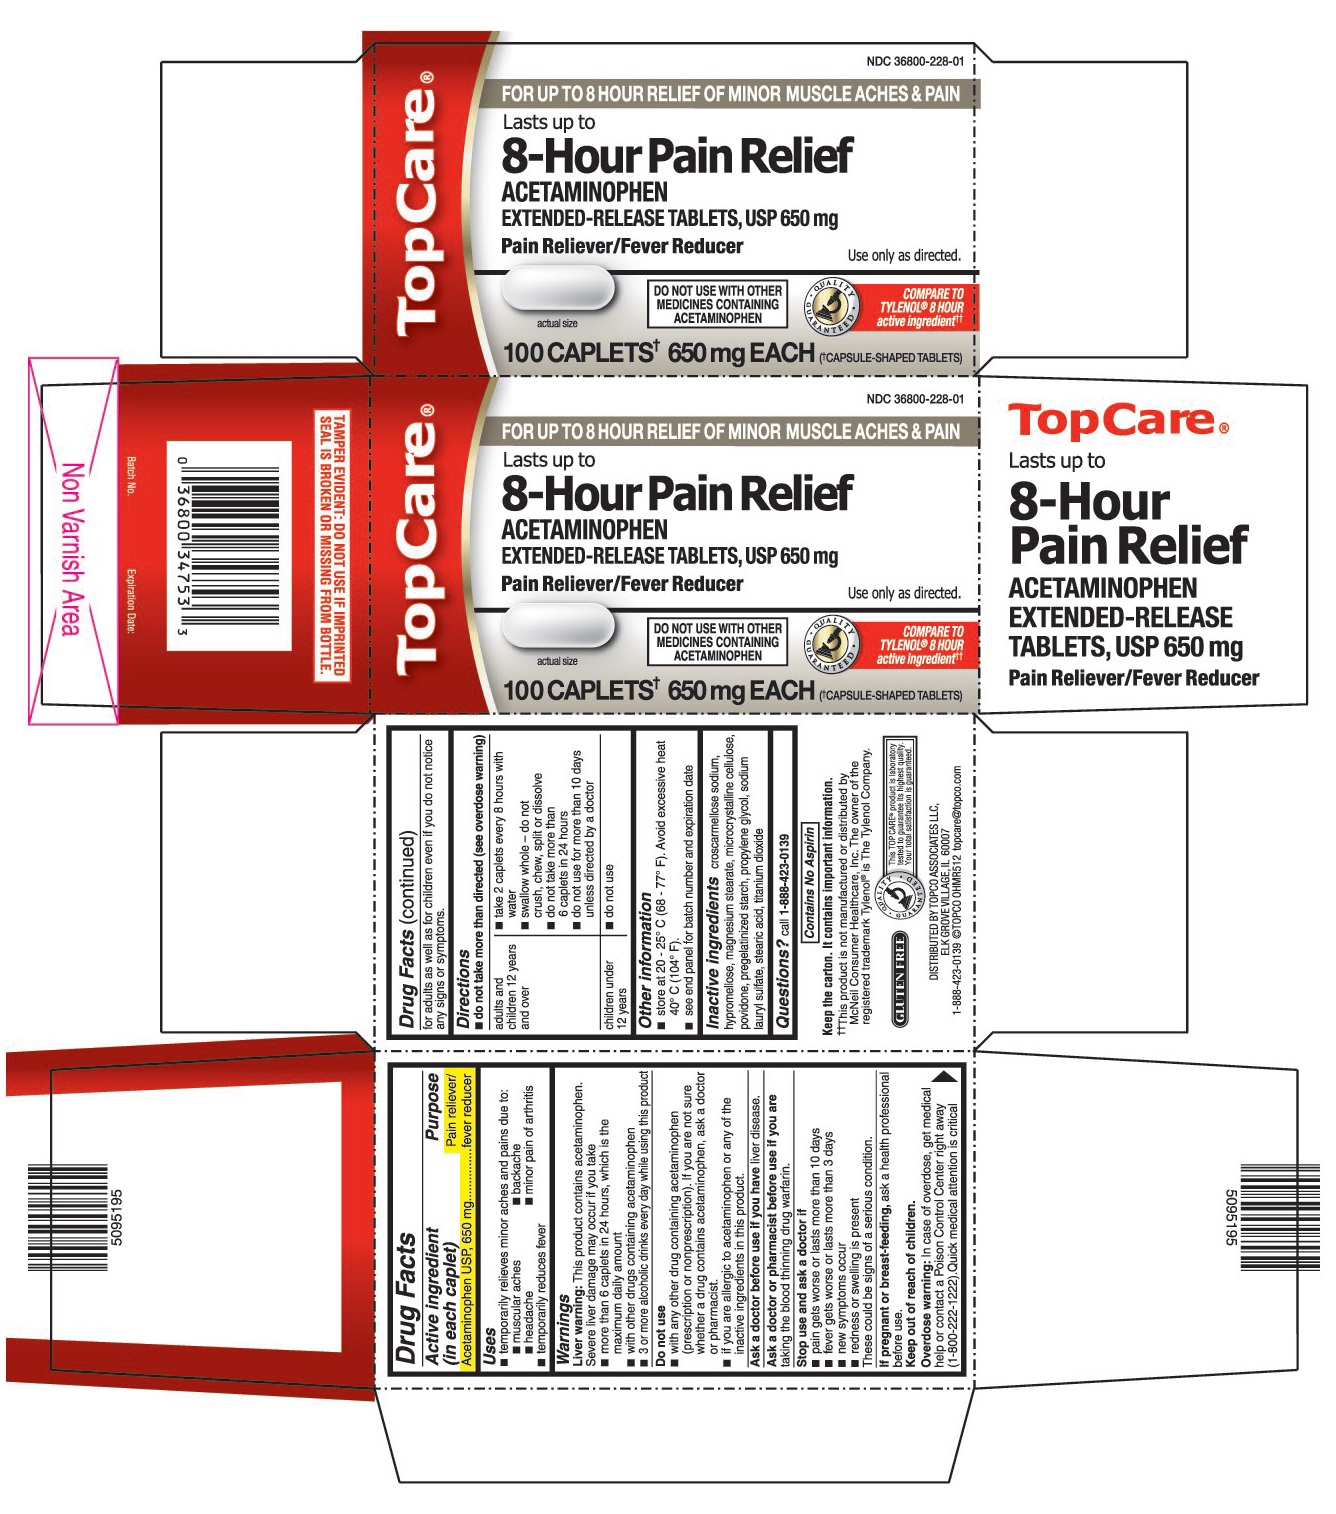 This is the 100 count bottle carton label for Topco Acetaminophen extended-release tablets, USP 650 mg.